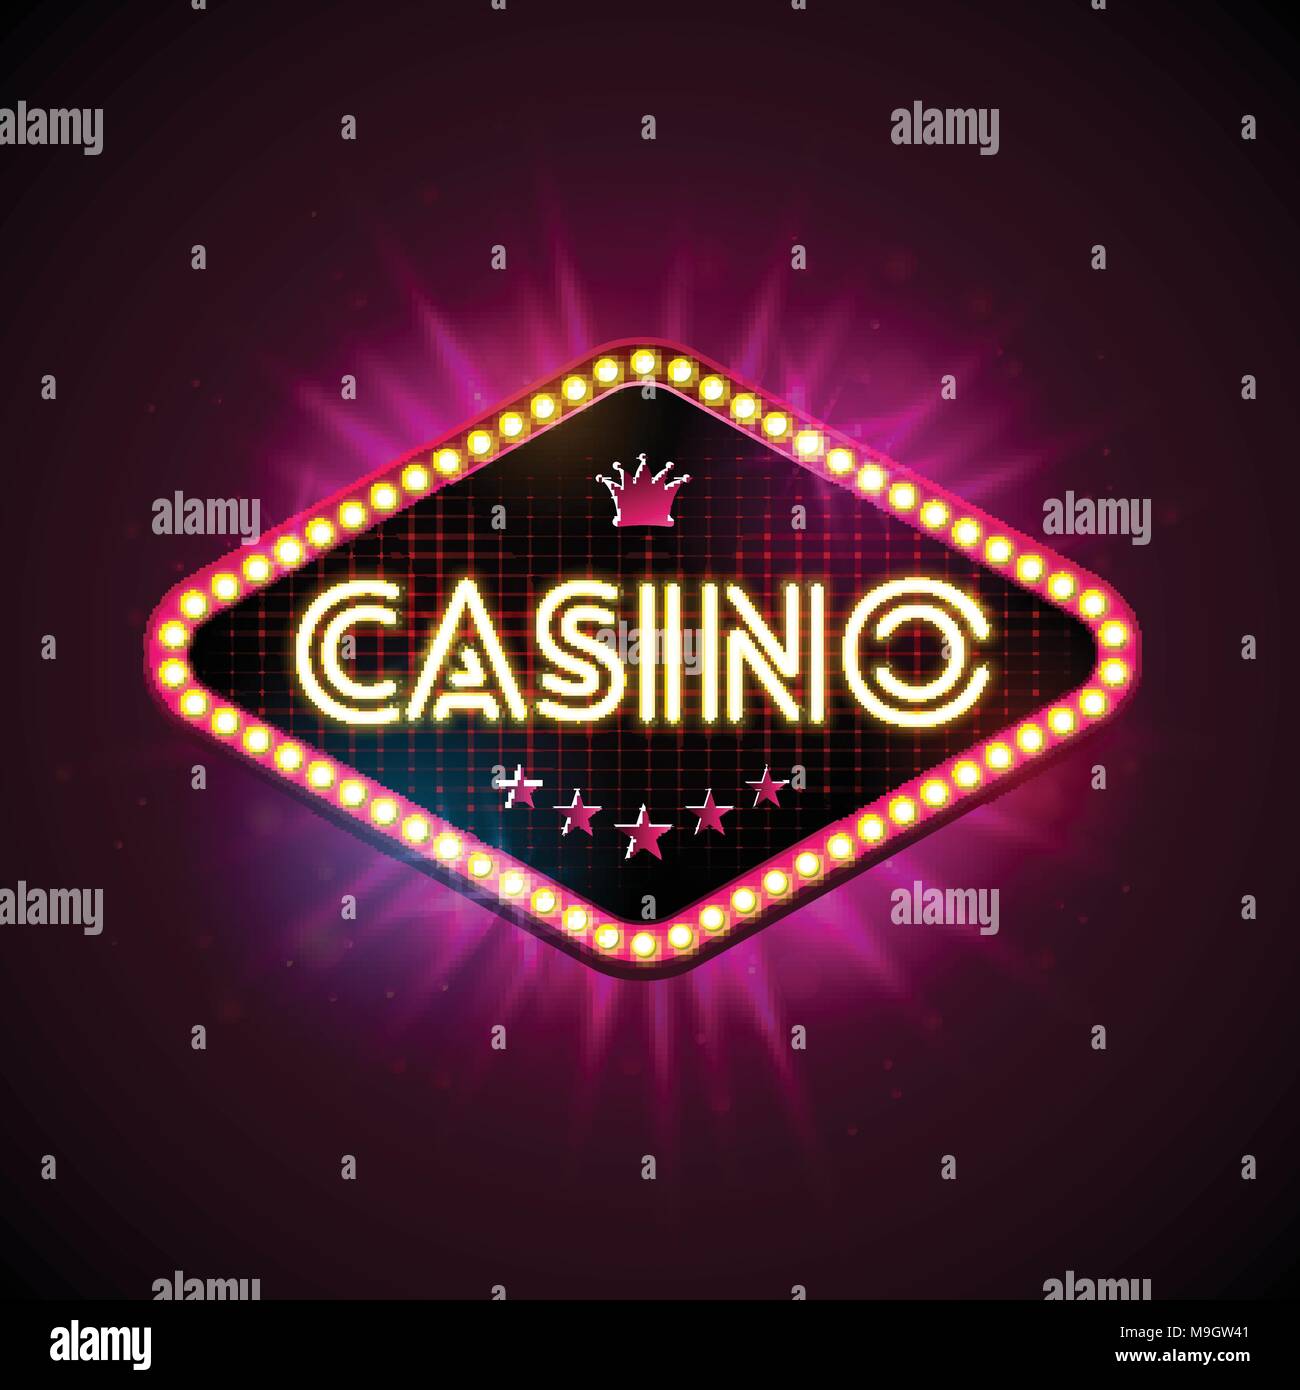 Casino Illustration with shiny lighting display and neon light letter on violet background. Vector gambling design with for invitation or promo banner. Stock Vector